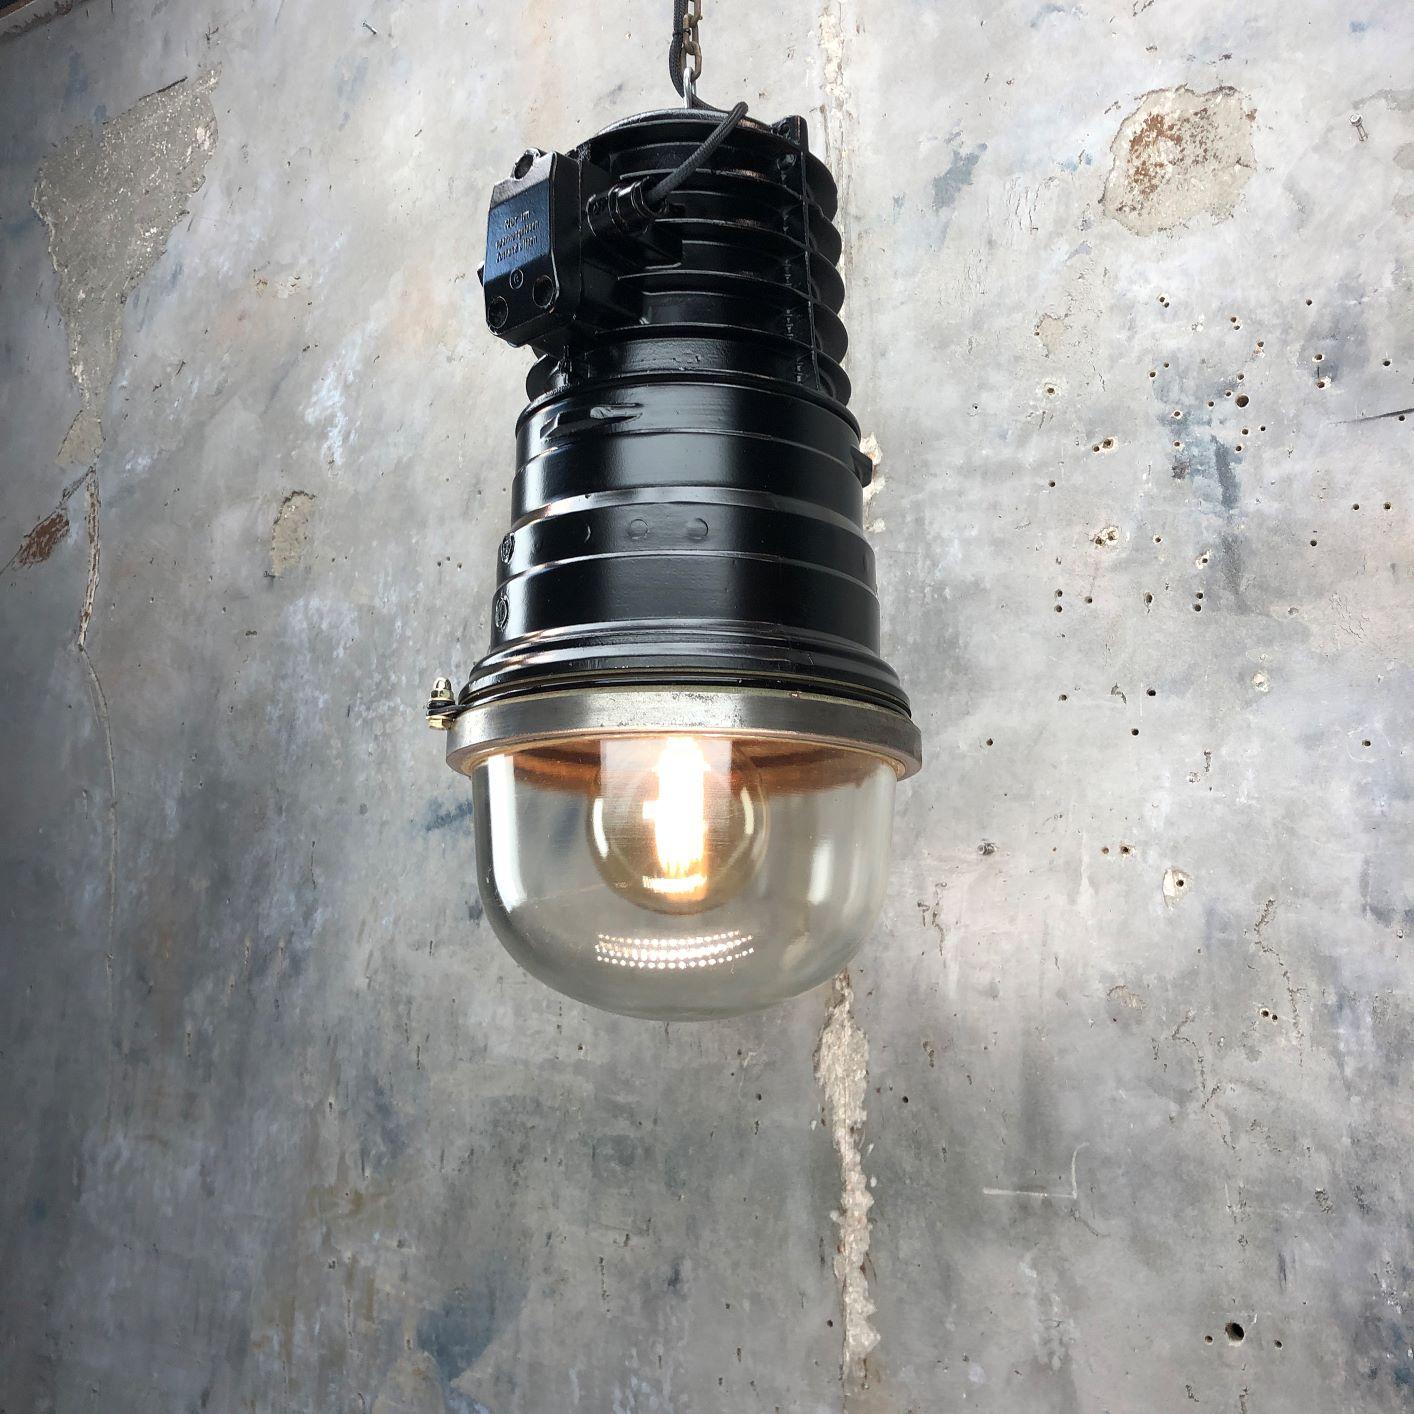 1970s Vintage Industrial Black Explosion Proof Ceiling Pendant by EOW For Sale 5